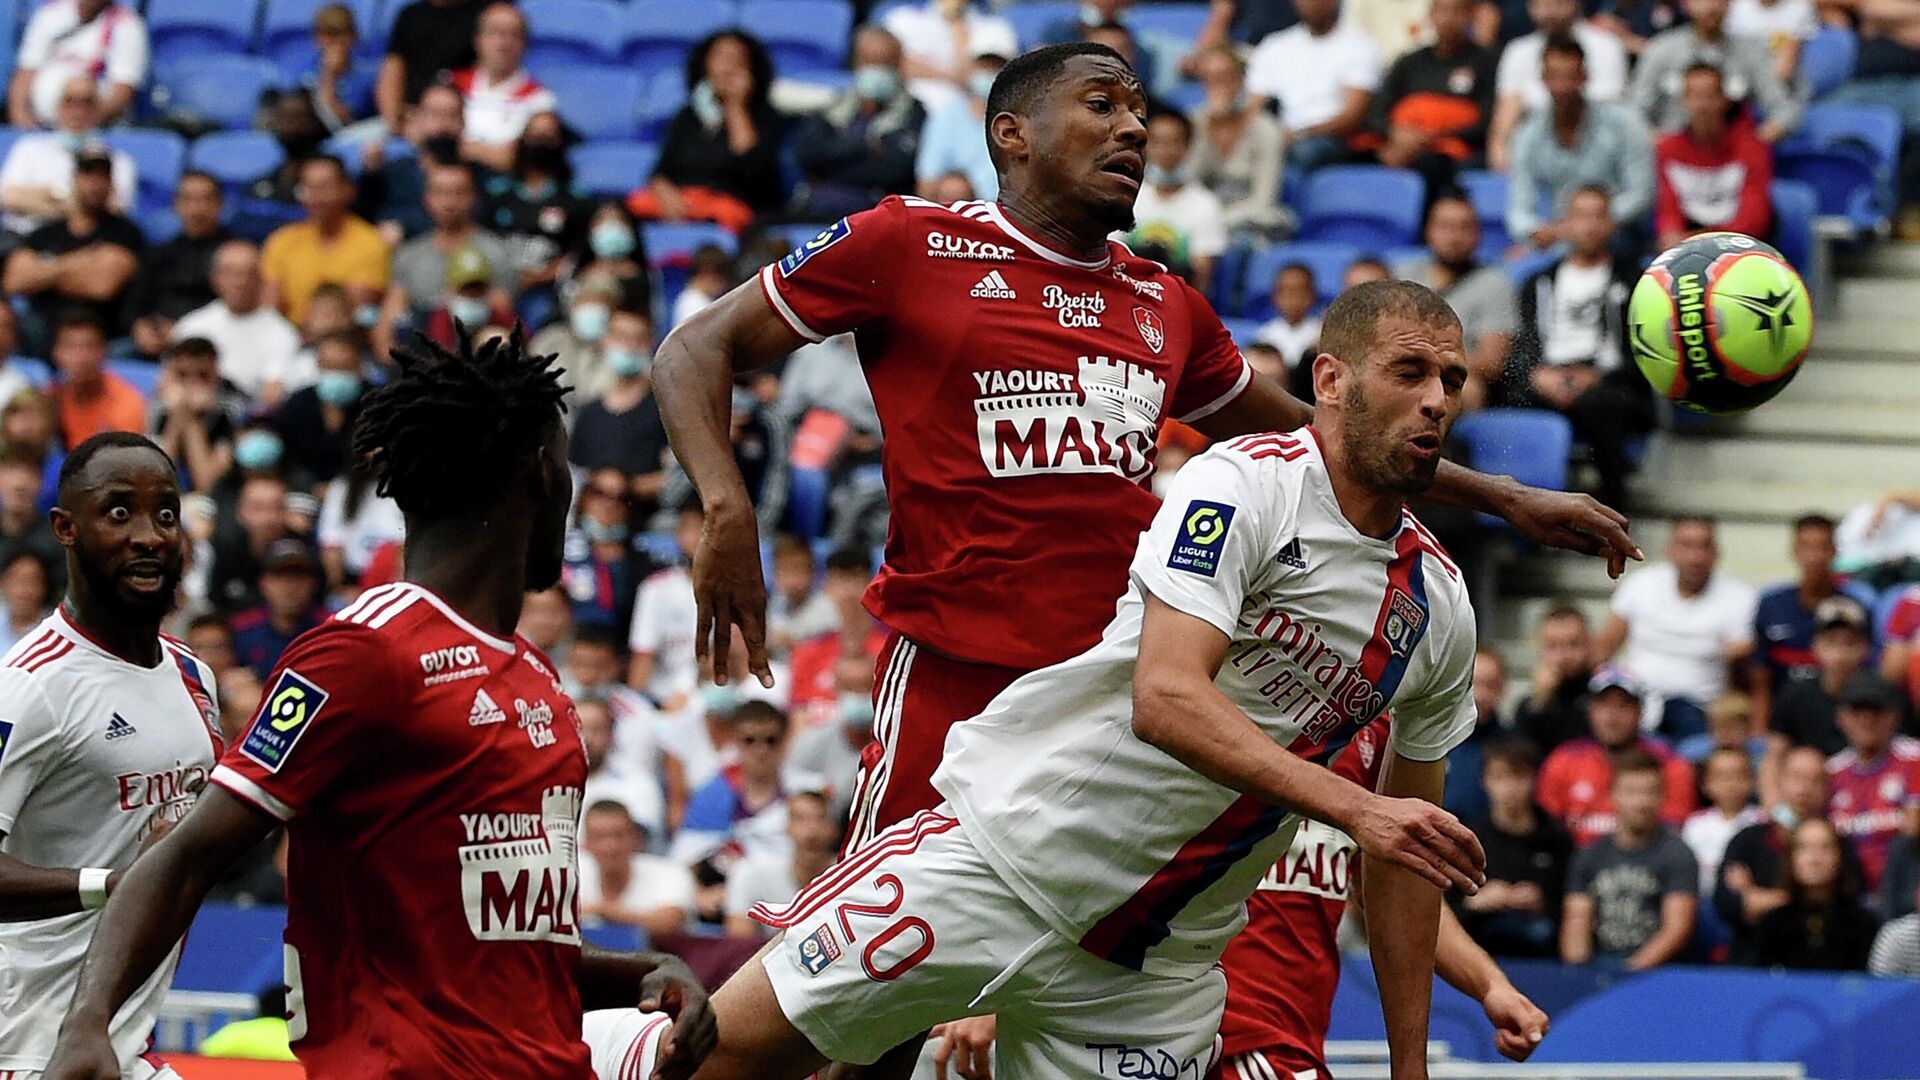 Brest's French defender Pierre-Gabriel Ronael (C) fights for the ball with Lyon's Algerian forward Islam Slimani (R) during the French L1 football match between Lyon (OL) and Brest (SB), at the Groupama stadium in Decine-Charpieu near Lyon on August 7, 2021. (Photo by JEAN-PHILIPPE KSIAZEK / AFP) - РИА Новости, 1920, 07.08.2021